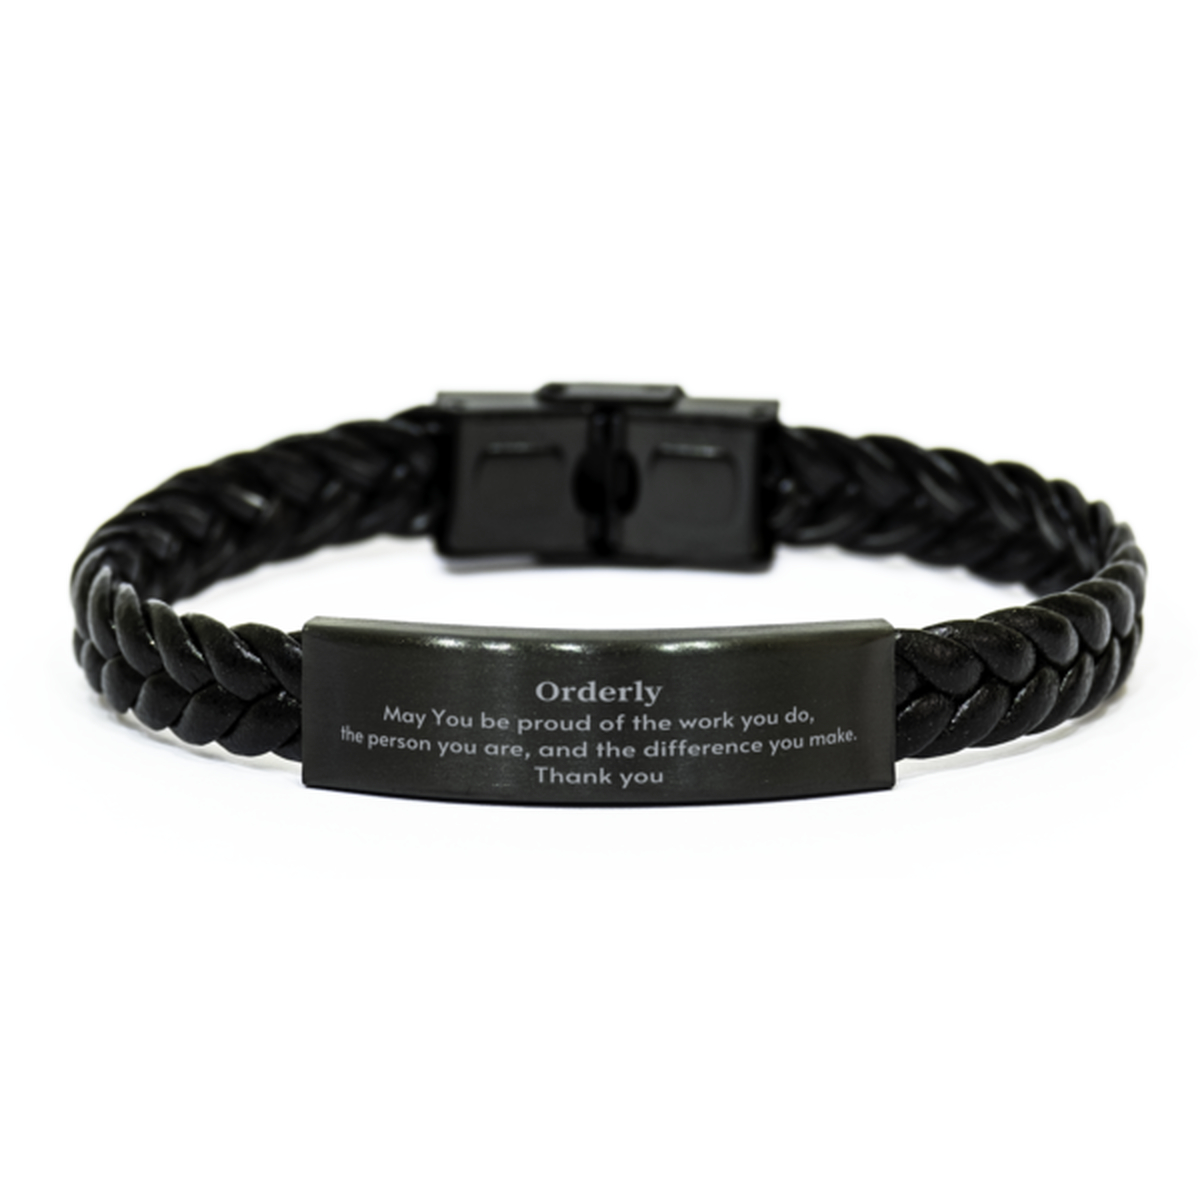 Heartwarming Braided Leather Bracelet Retirement Coworkers Gifts for Orderly, Orderly May You be proud of the work you do, the person you are Gifts for Boss Men Women Friends